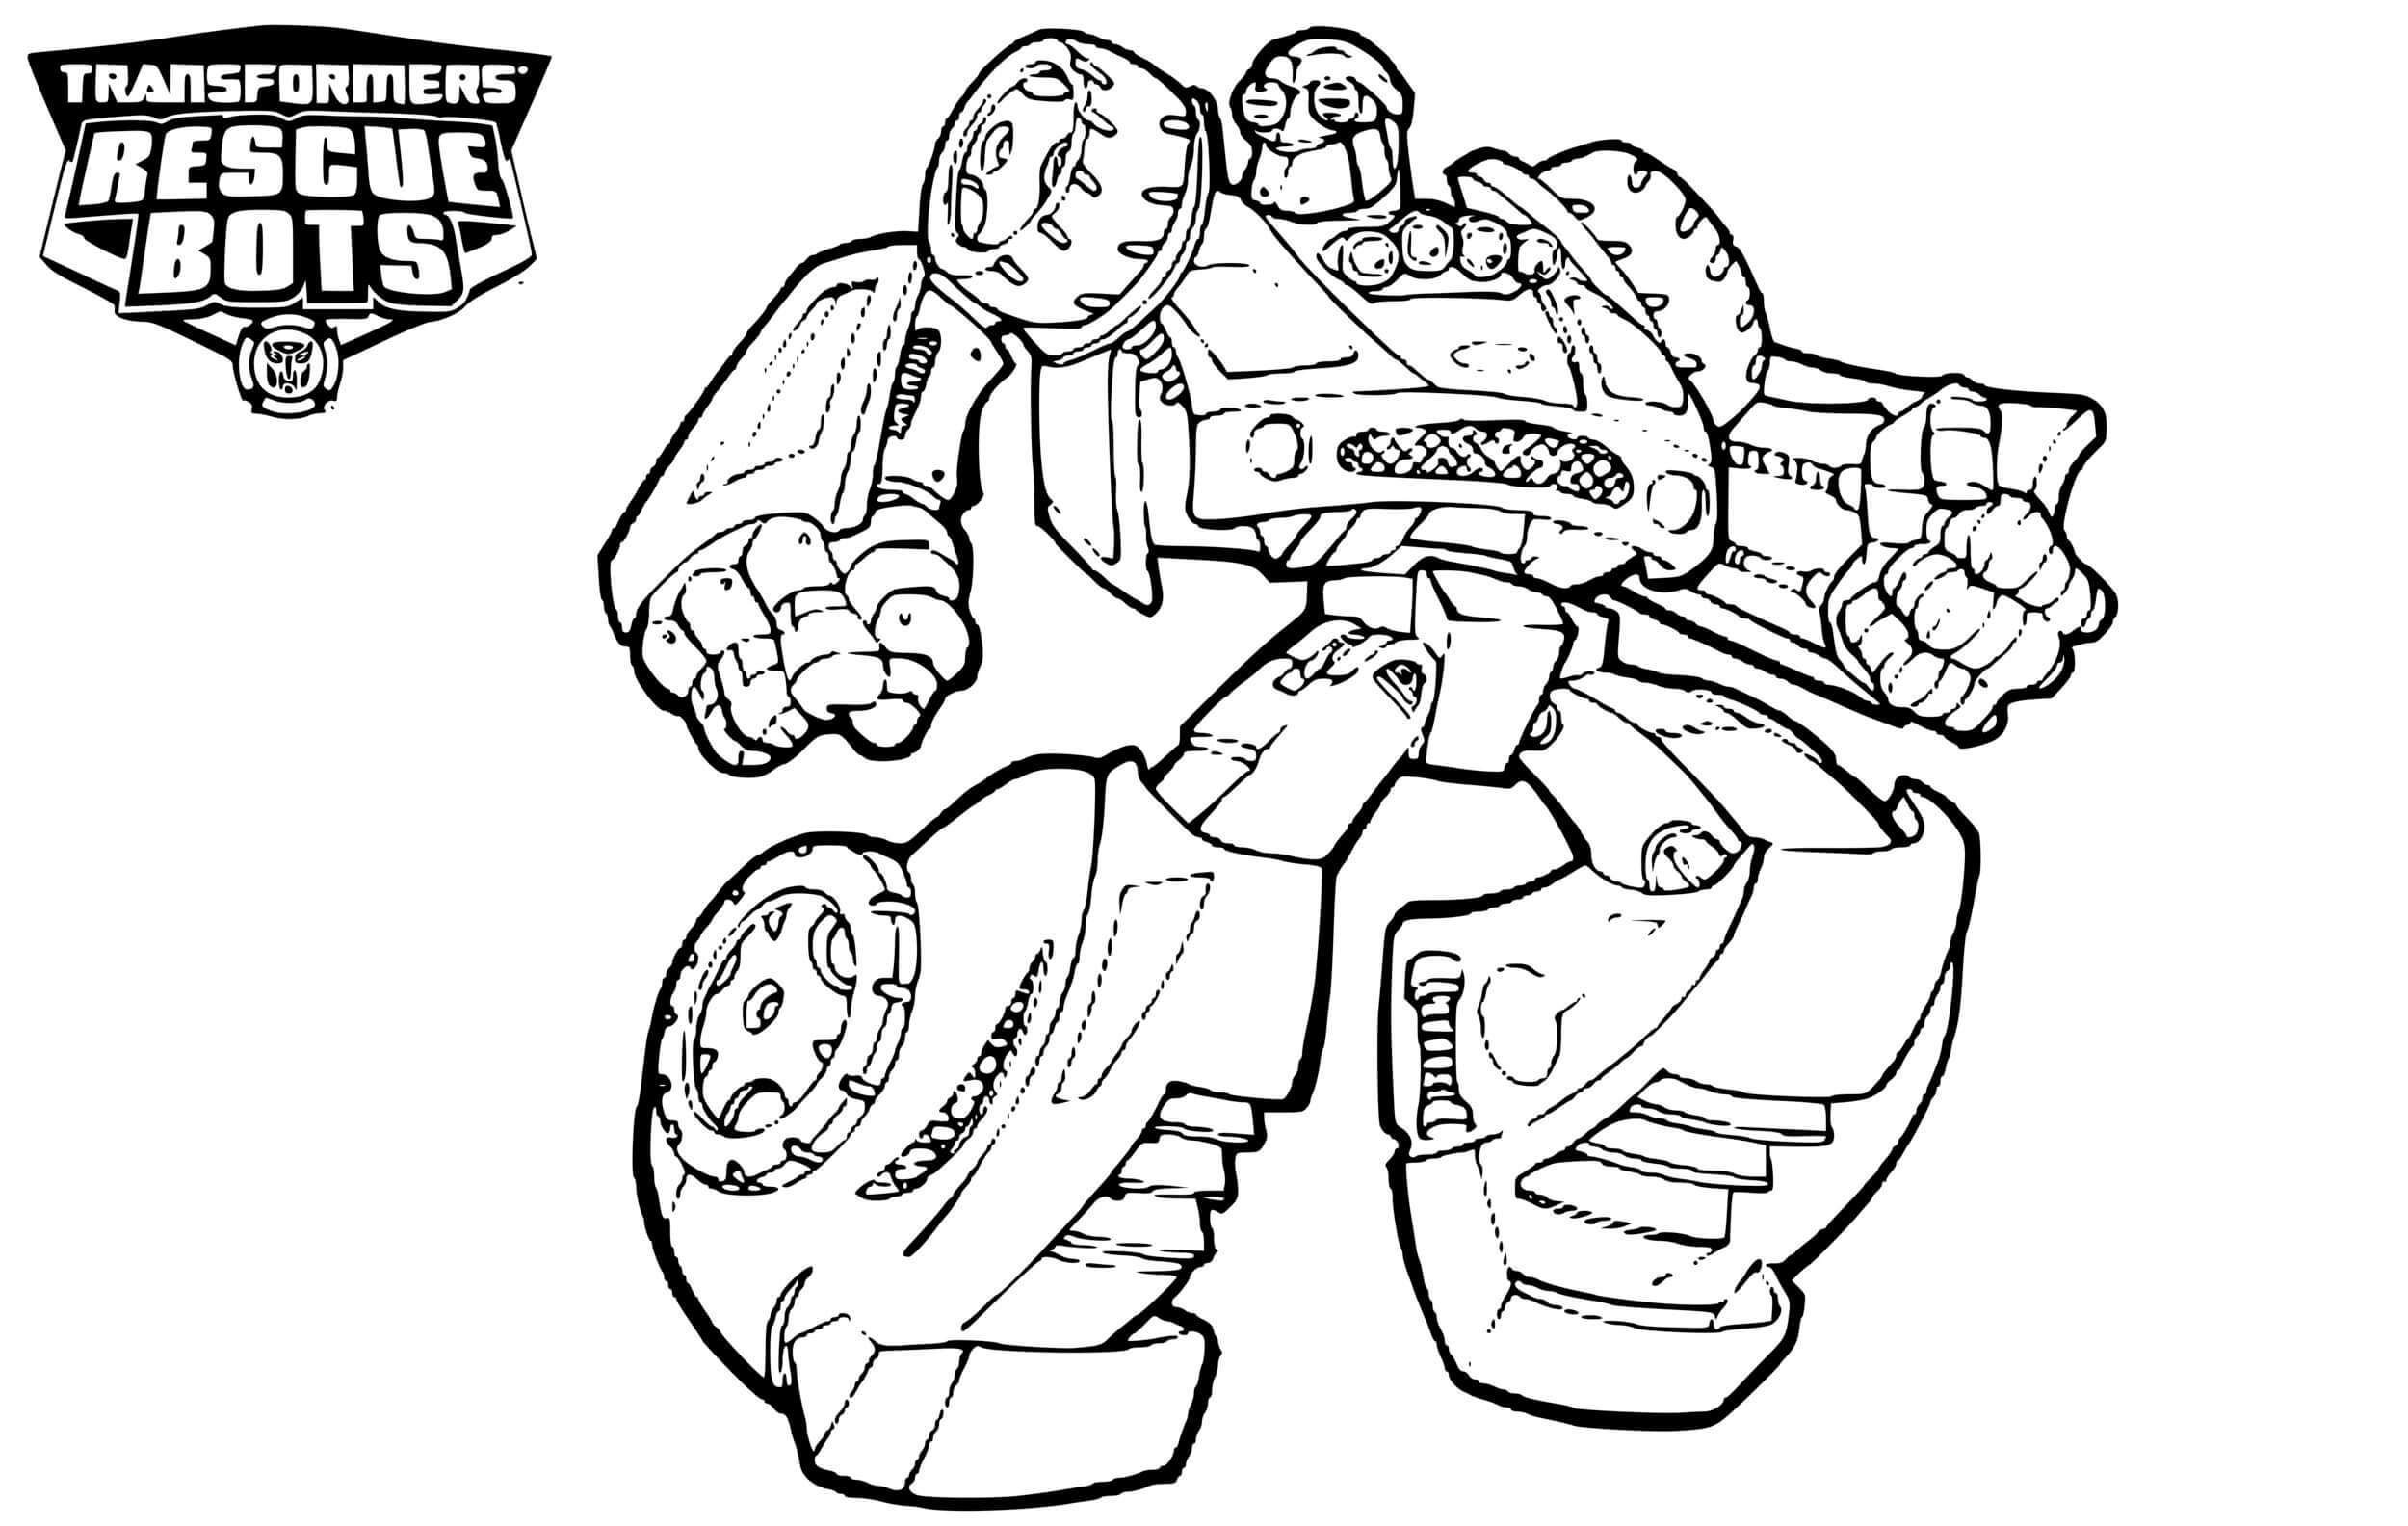 Transformers Rescue Bots Line Drawing